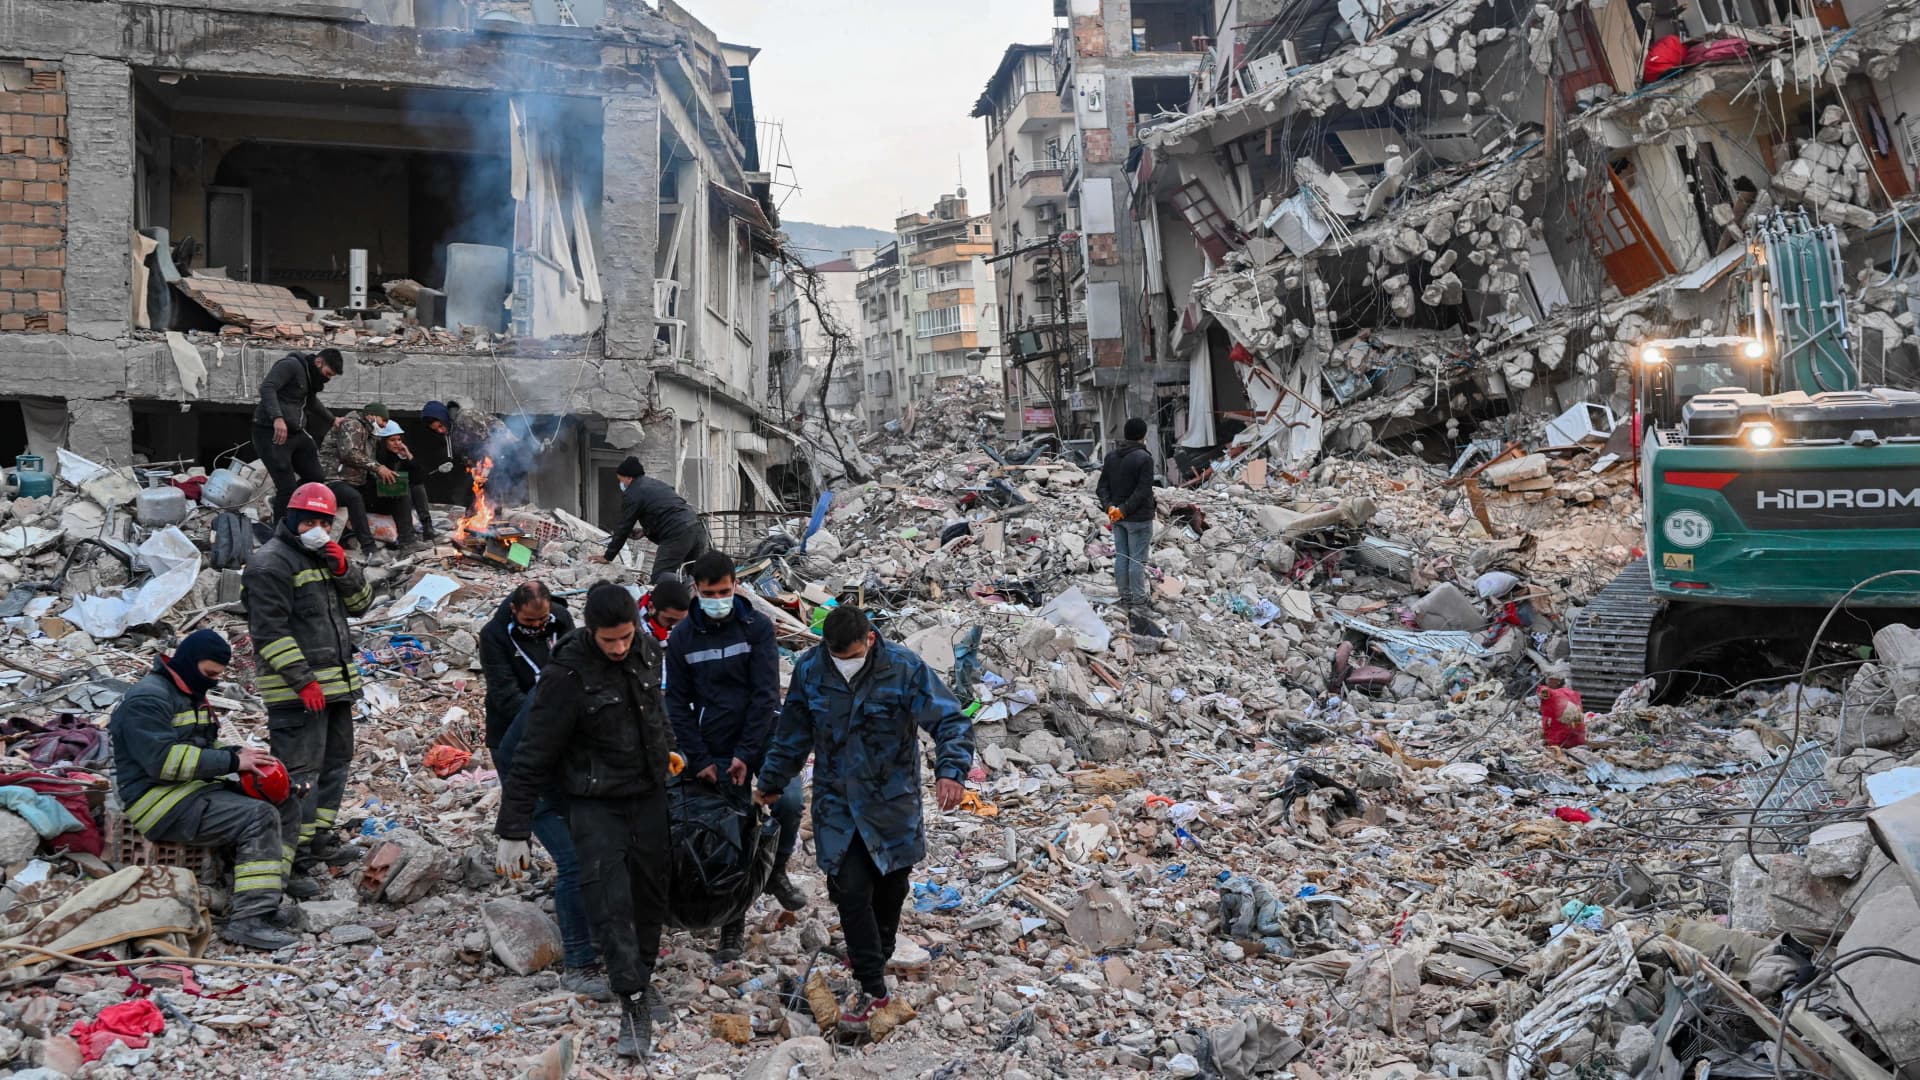 People carry a bodybag as local residents wait for their relatives to be pulled out from the rubble of collapsed buildings in Hatay, on February 14, 2023, after a 7.8-magnitude earthquake struck the country's south-east.